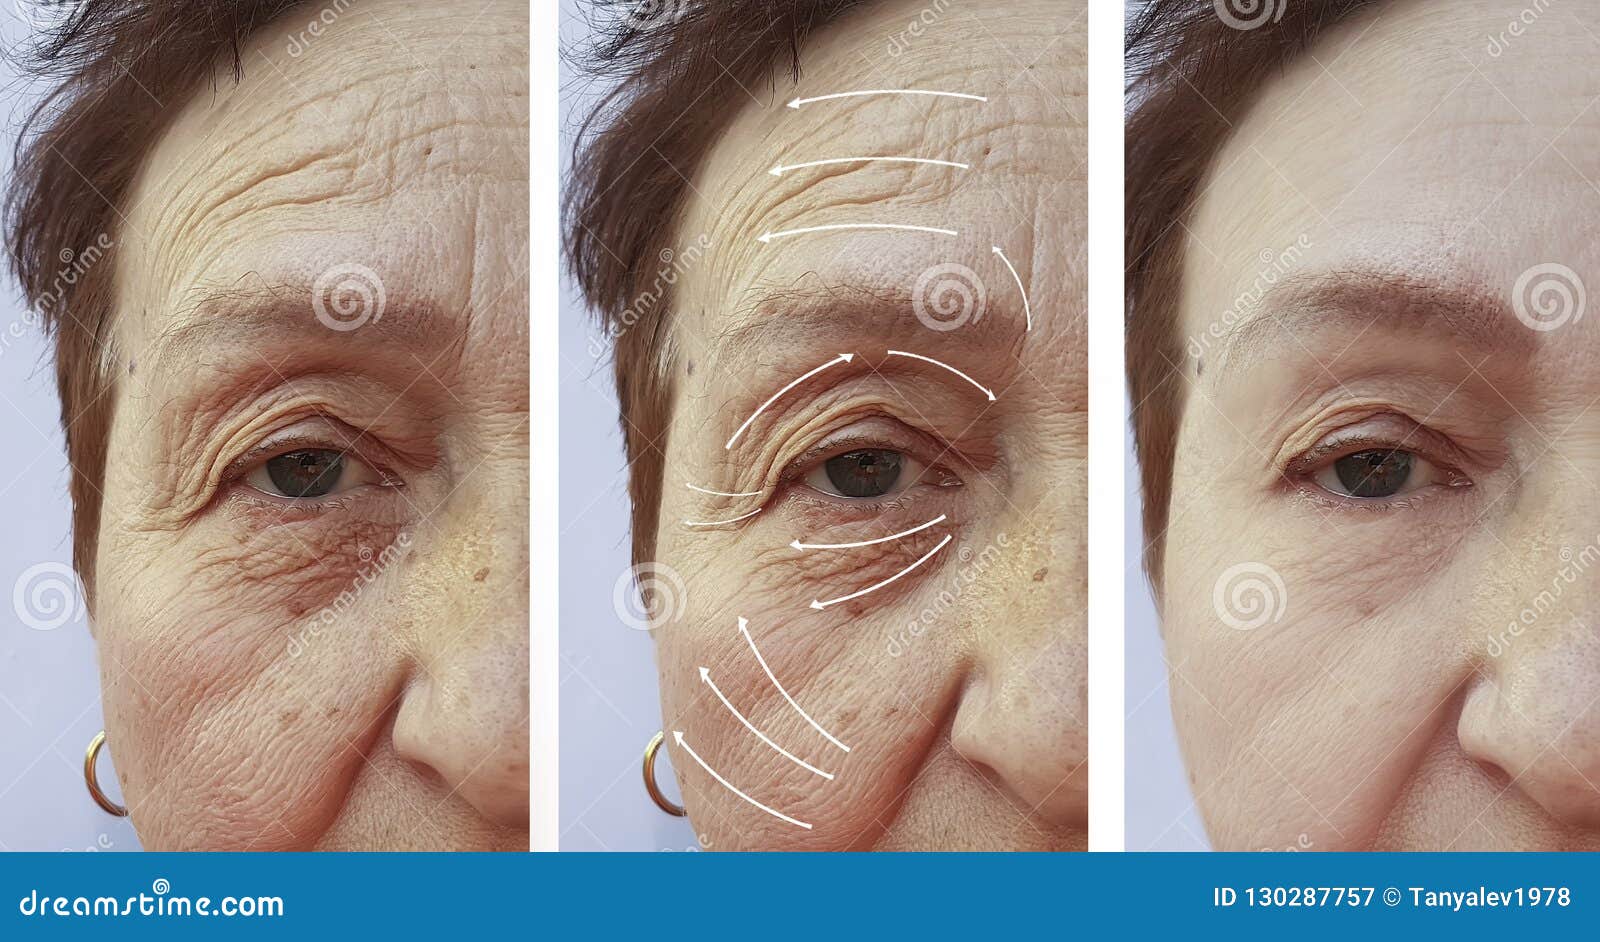 face, elderly woman, wrinkles, plastic filler difference patient contrast correction before and after procedures, arrow